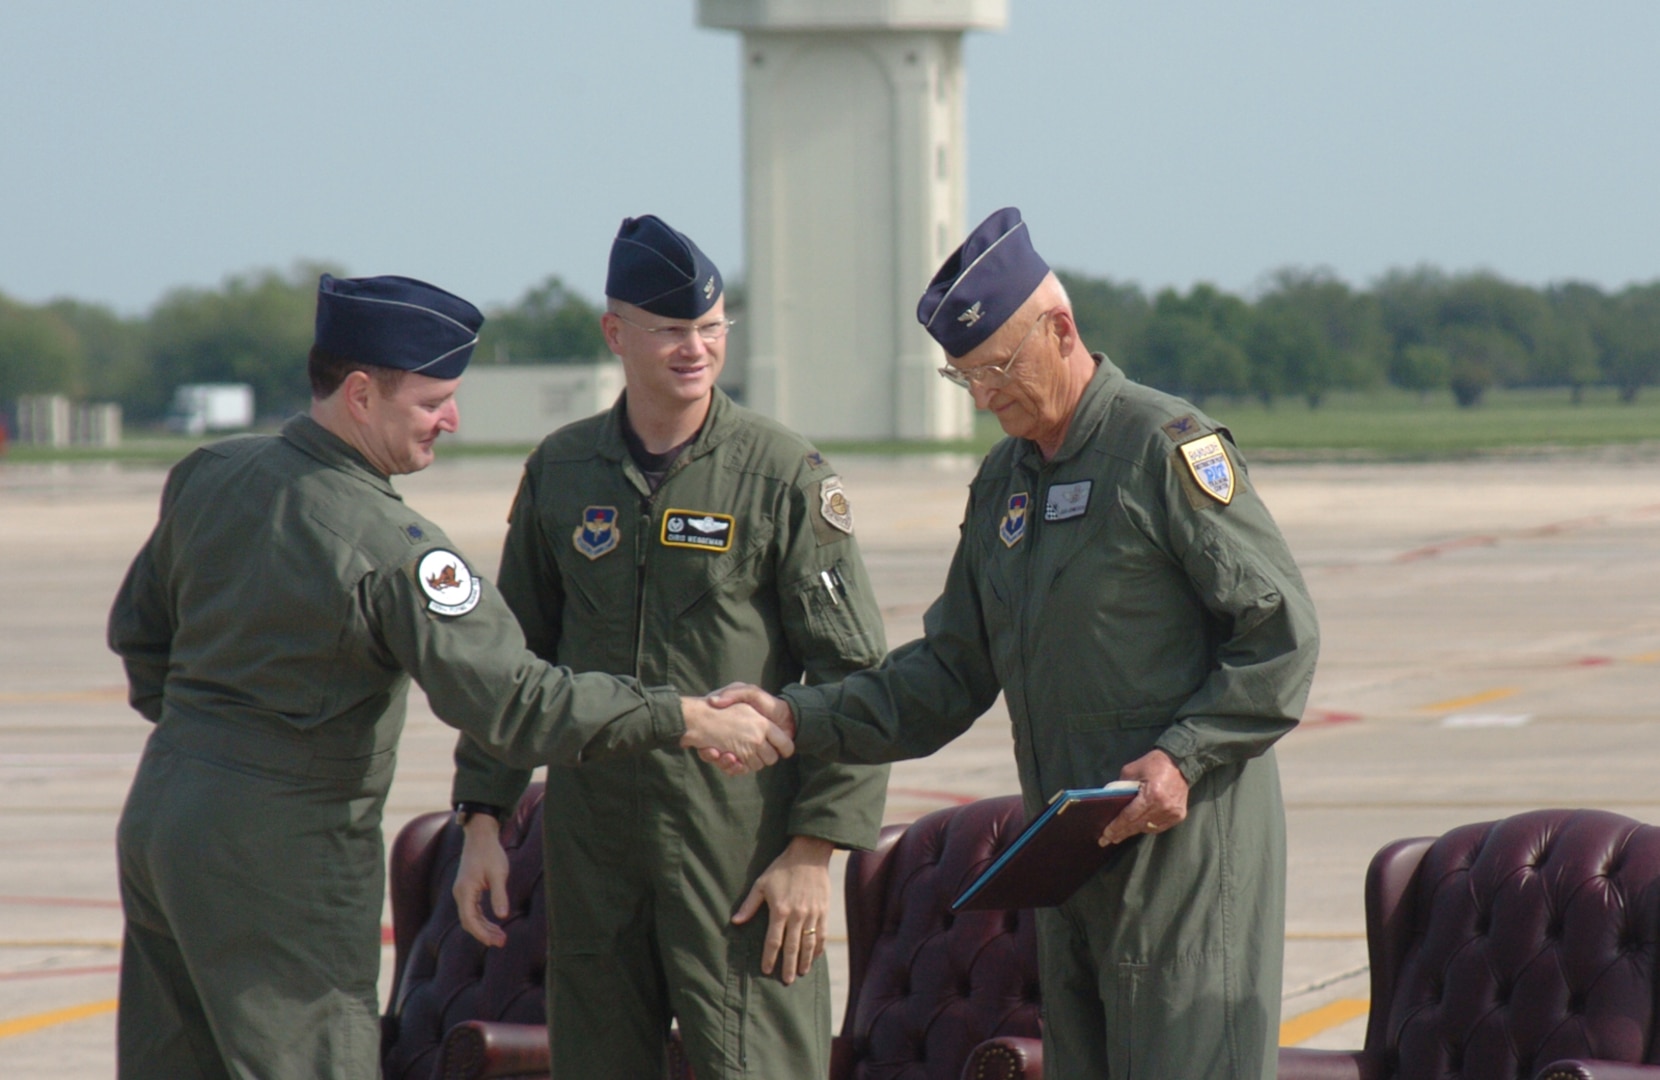 Lt. Col. Jimmy Donohue, (left) 559th Flying Training Squadron commander, and Col. Christopher Weggeman, 12th Operations Group commander, thank retired Col. Robert Hermanson, 559th FTS commander from July 1974 to July 1976, for his service with the unit and the Tweet. Colonel Hermanson was the guest speaker at the T-37B base retirement ceremony April 6. (U.S. Air Force photo by Dave Terry)